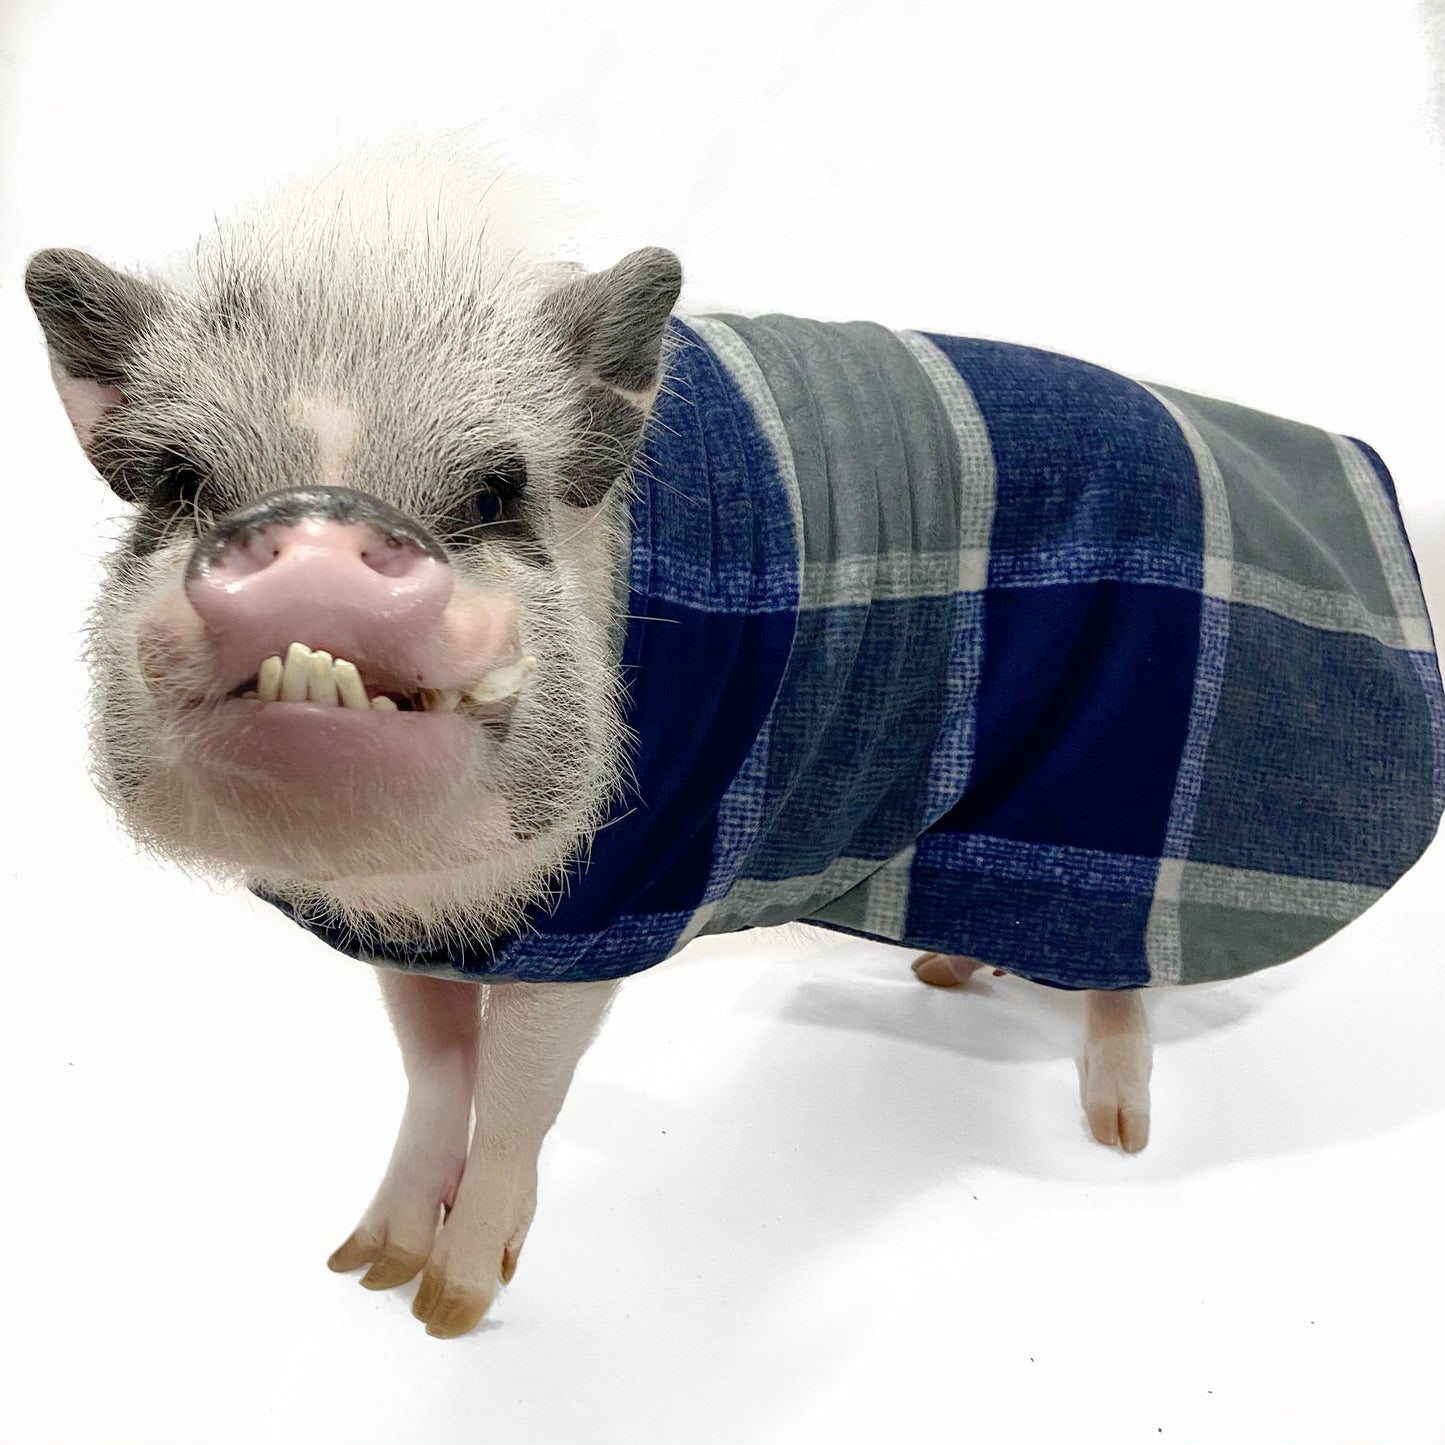 Custom Pig Sweater Embroidered Pet Name - Double Layer Mini Pig Coat with Leash Hole for Potbelly Pigs, Hogs, Kune Kunes & Boar Clothing